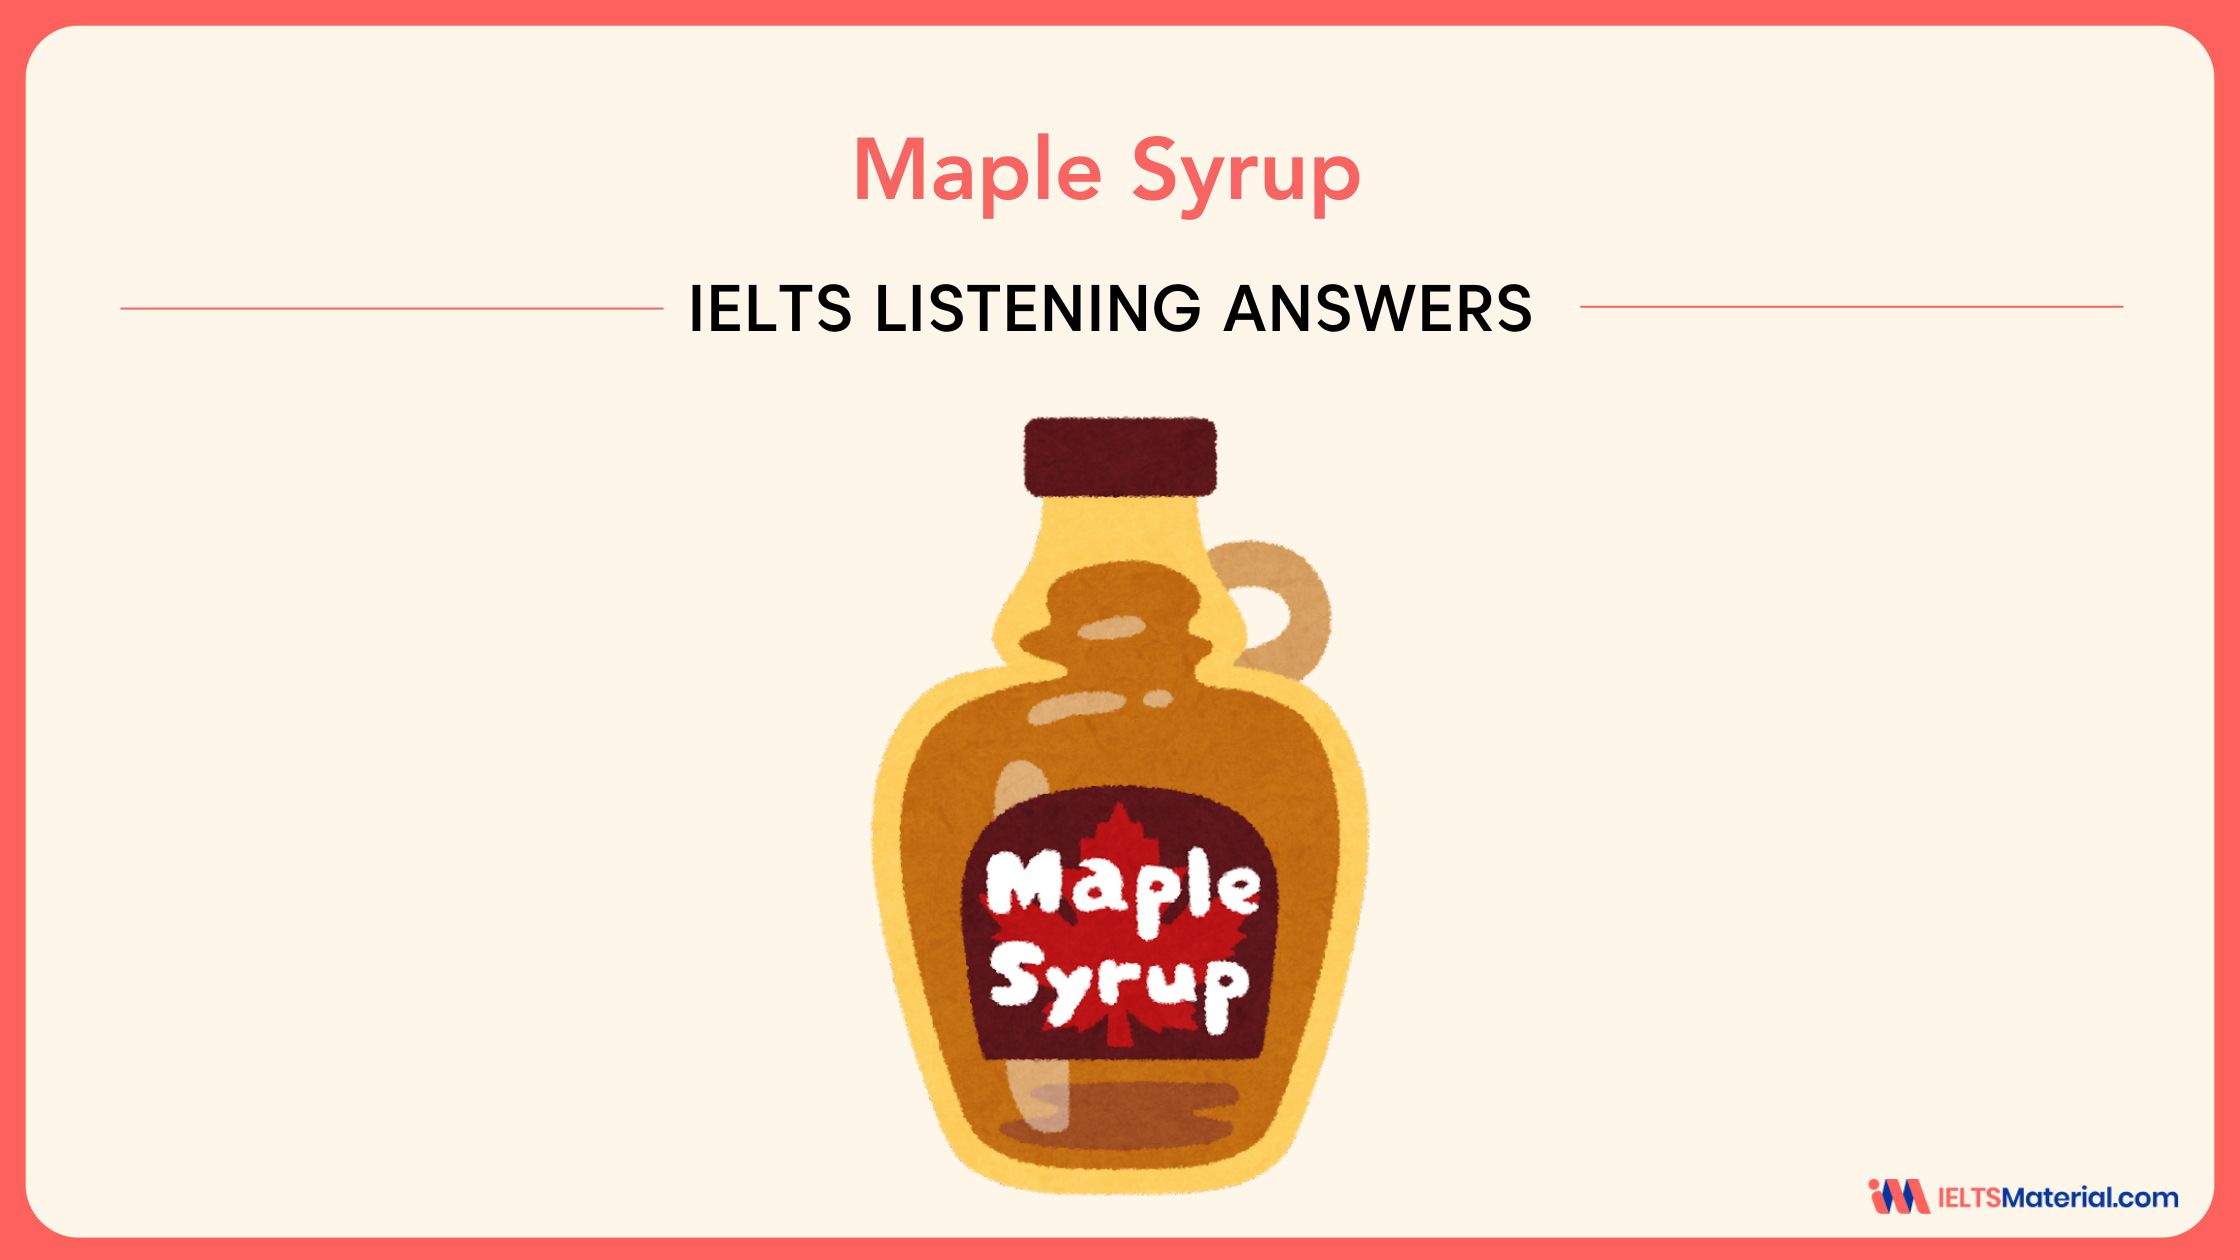 Maple Syrup – IELTS Listening Answers